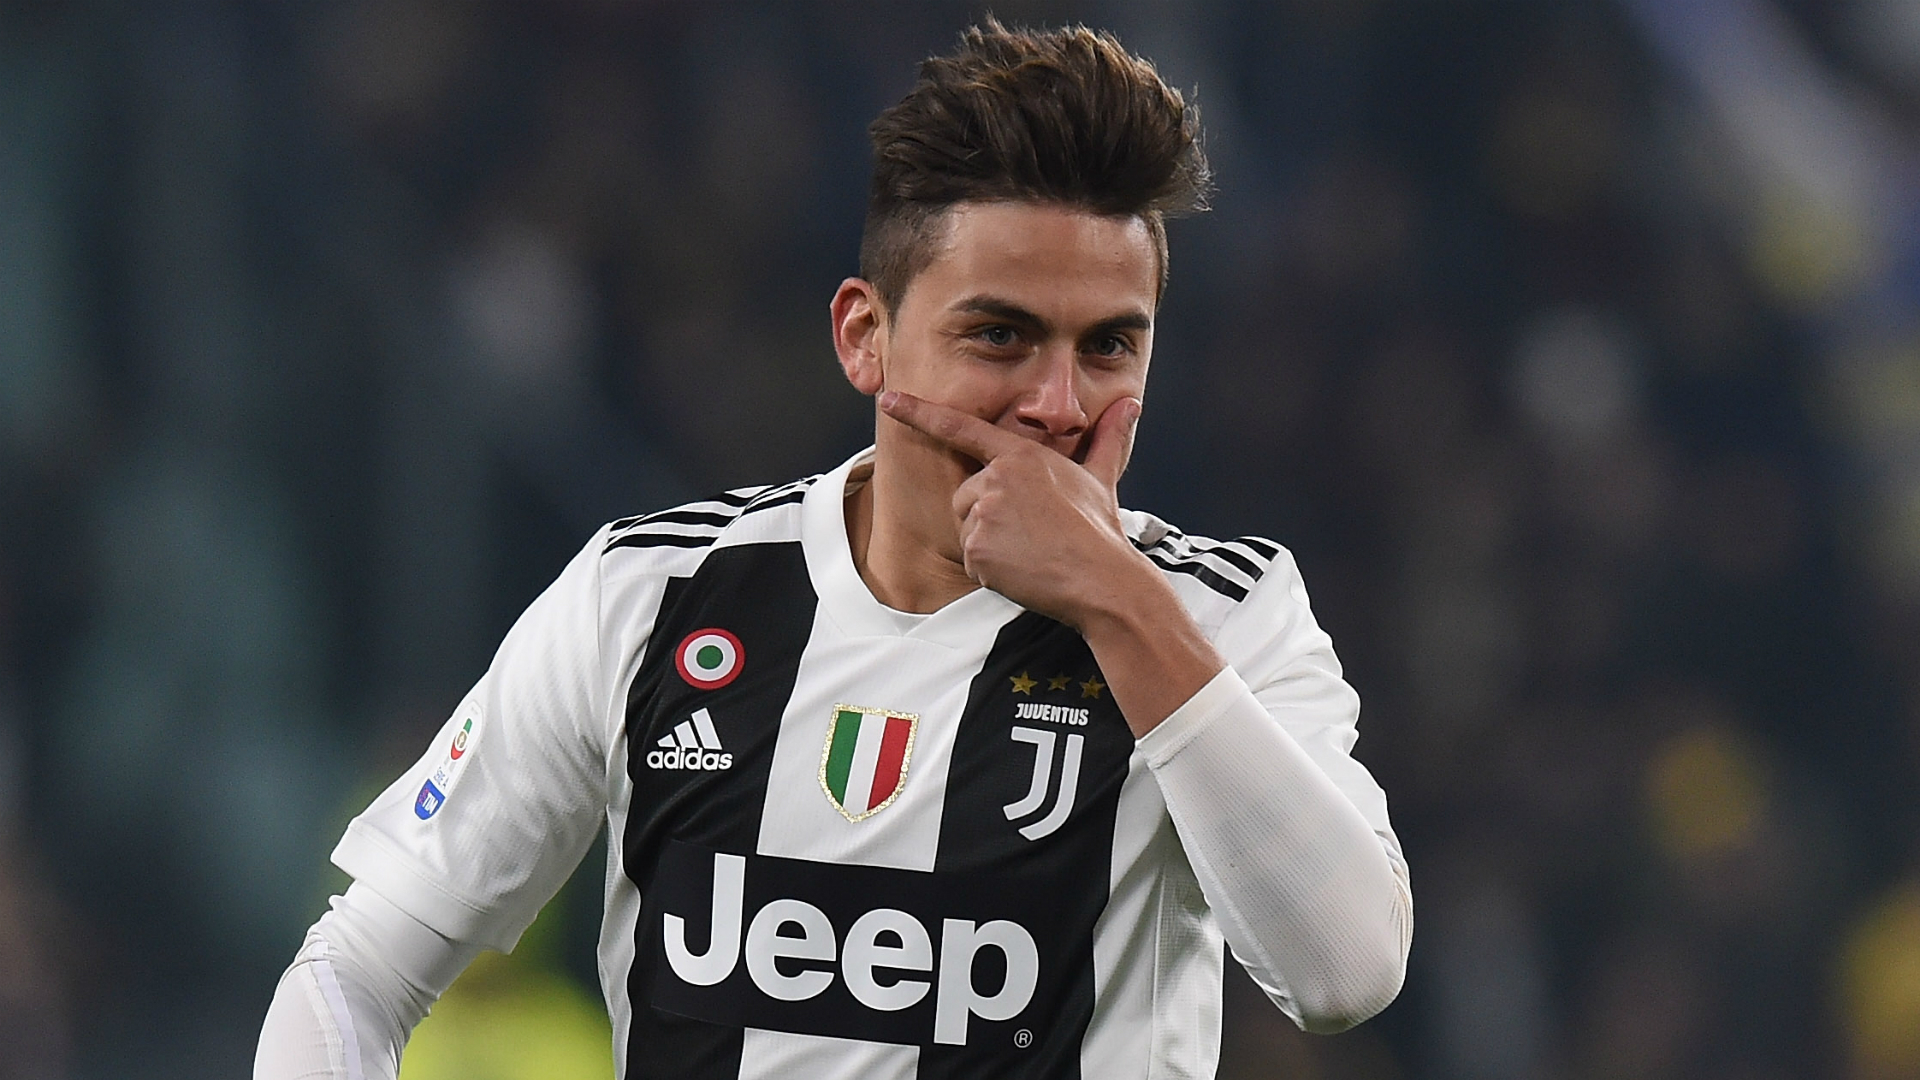 Paulo Dybala scored his first Serie A goal since November against Frosinone, but his all-round play pleases Massimiliano Allegri the most.